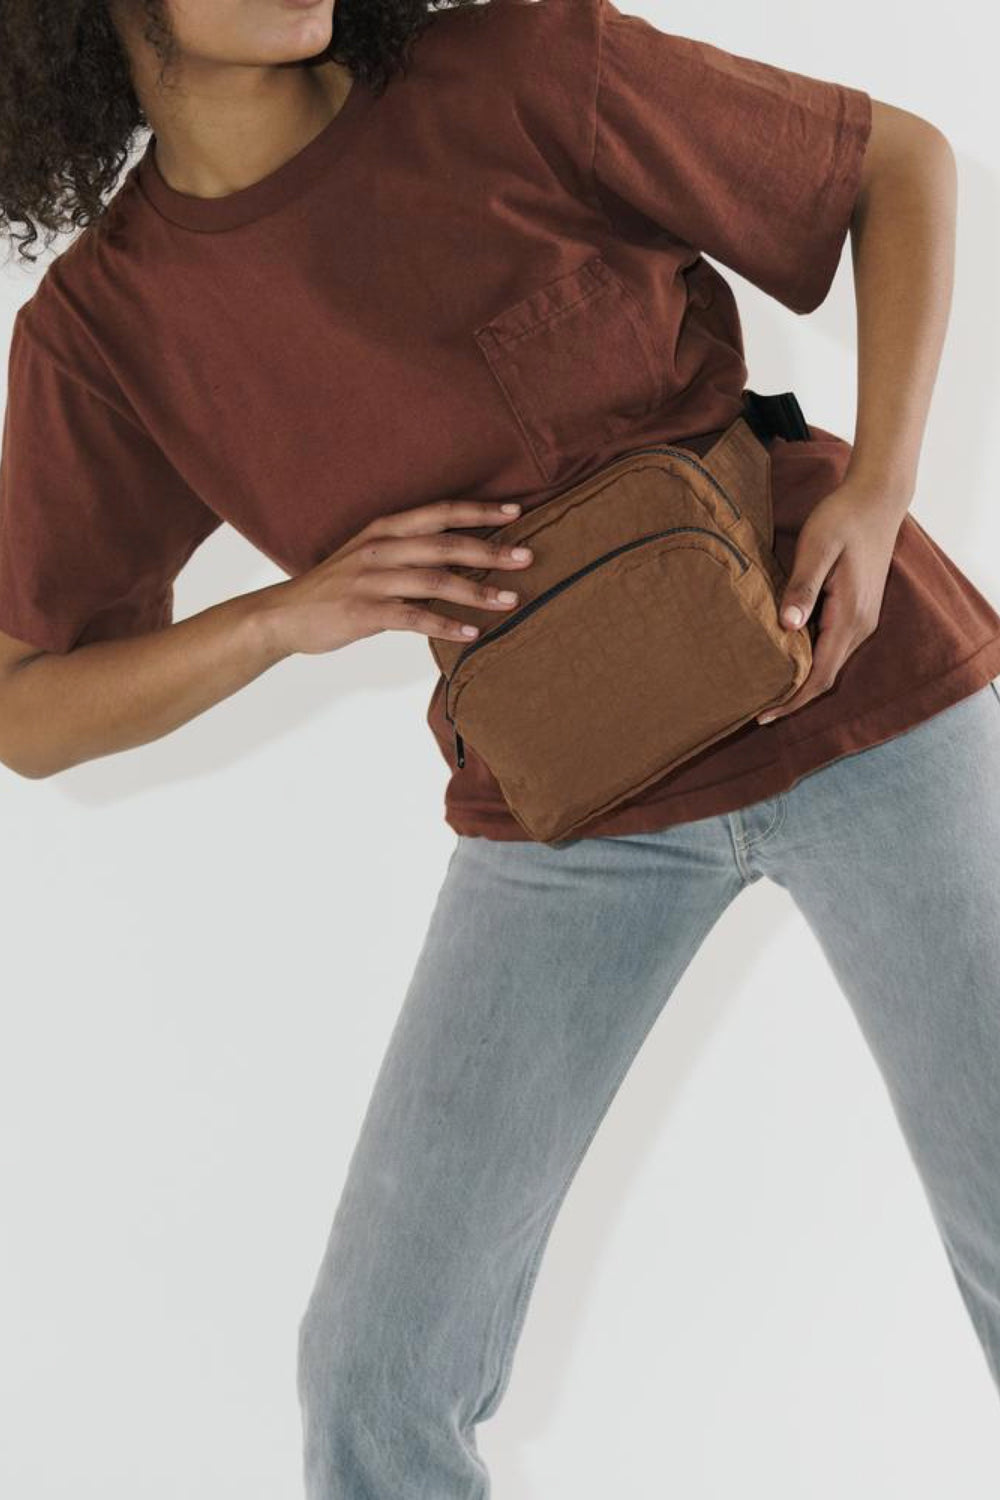 Brown Fanny Pack